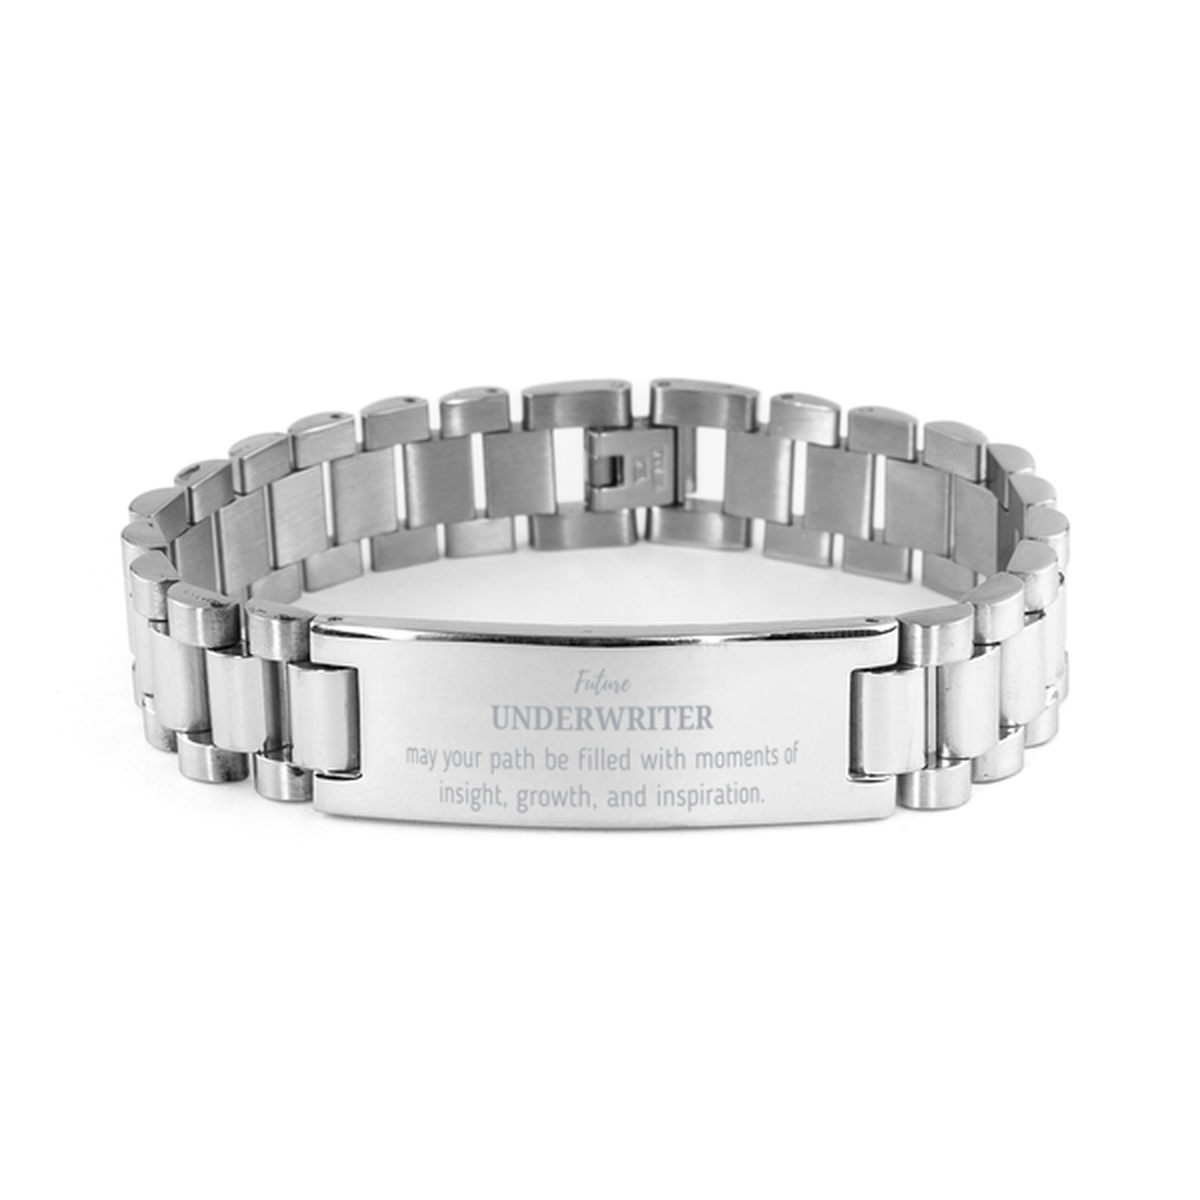 Future Underwriter Gifts, May your path be filled with moments of insight, Graduation Gifts for New Underwriter, Christmas Unique Ladder Stainless Steel Bracelet For Men, Women, Friends